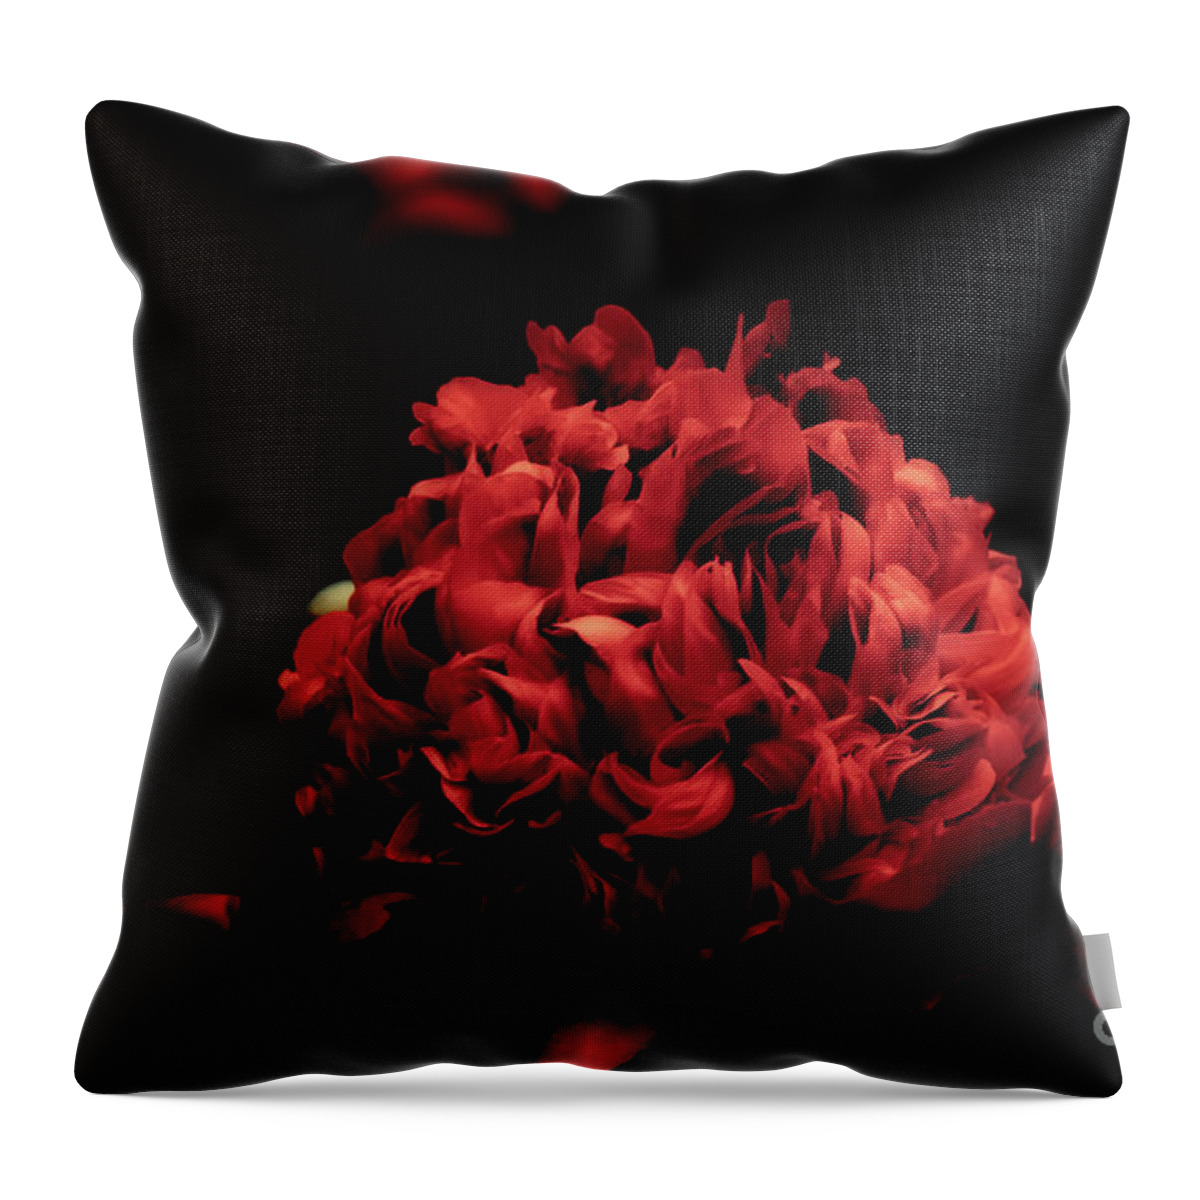 Desire After Midnight Throw Pillow featuring the photograph Desire After Midnight 2 by Rachel Cohen